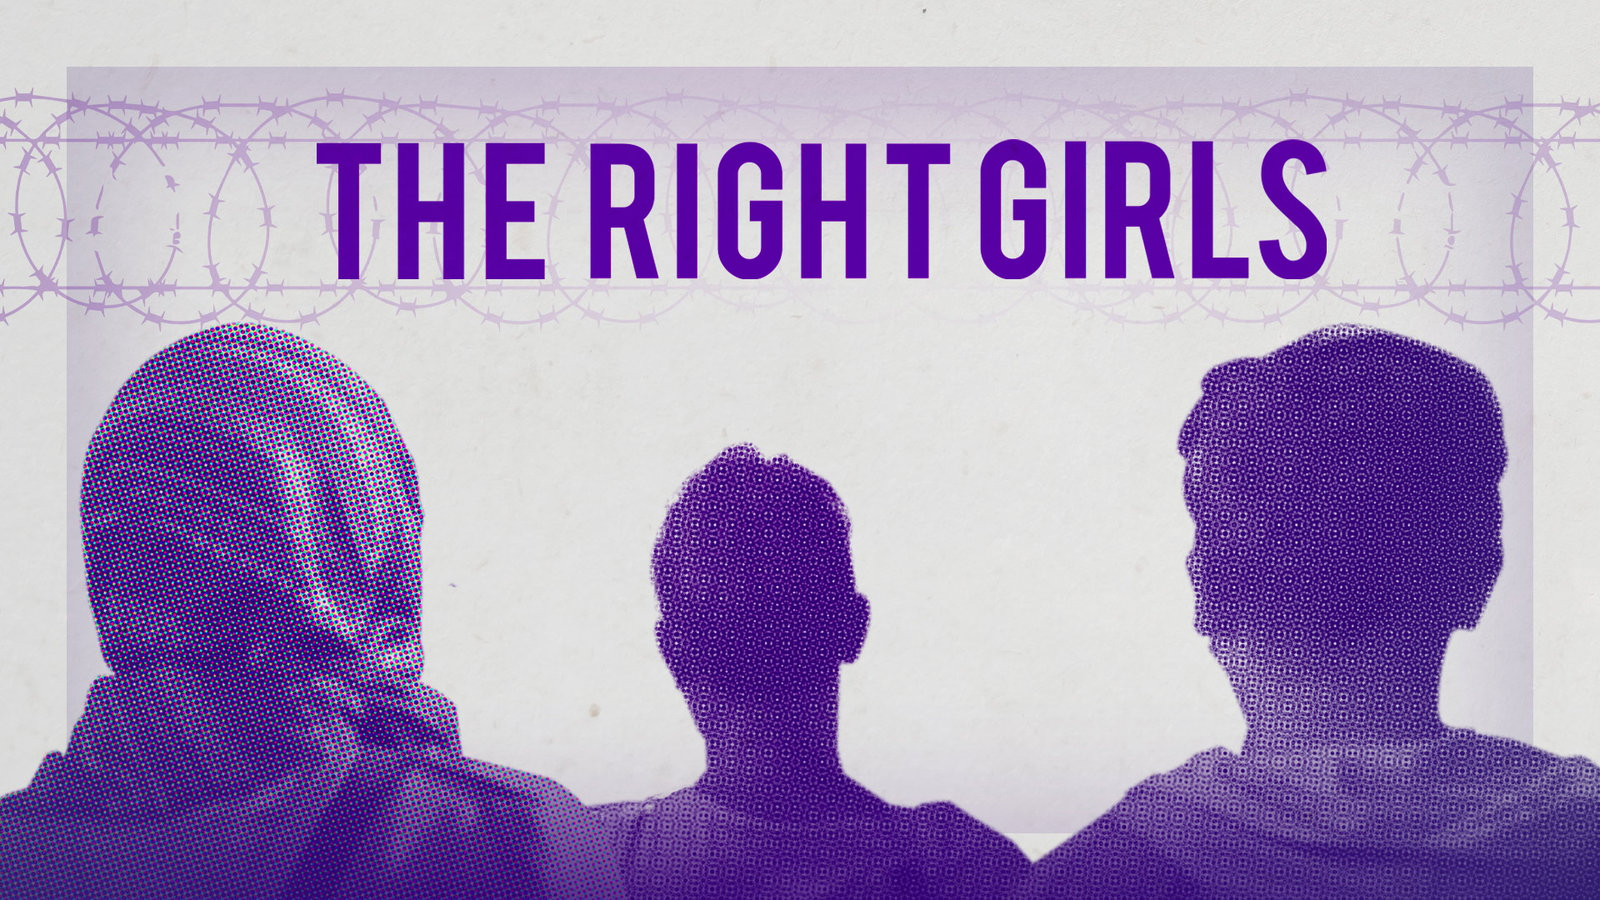 The Right Girls